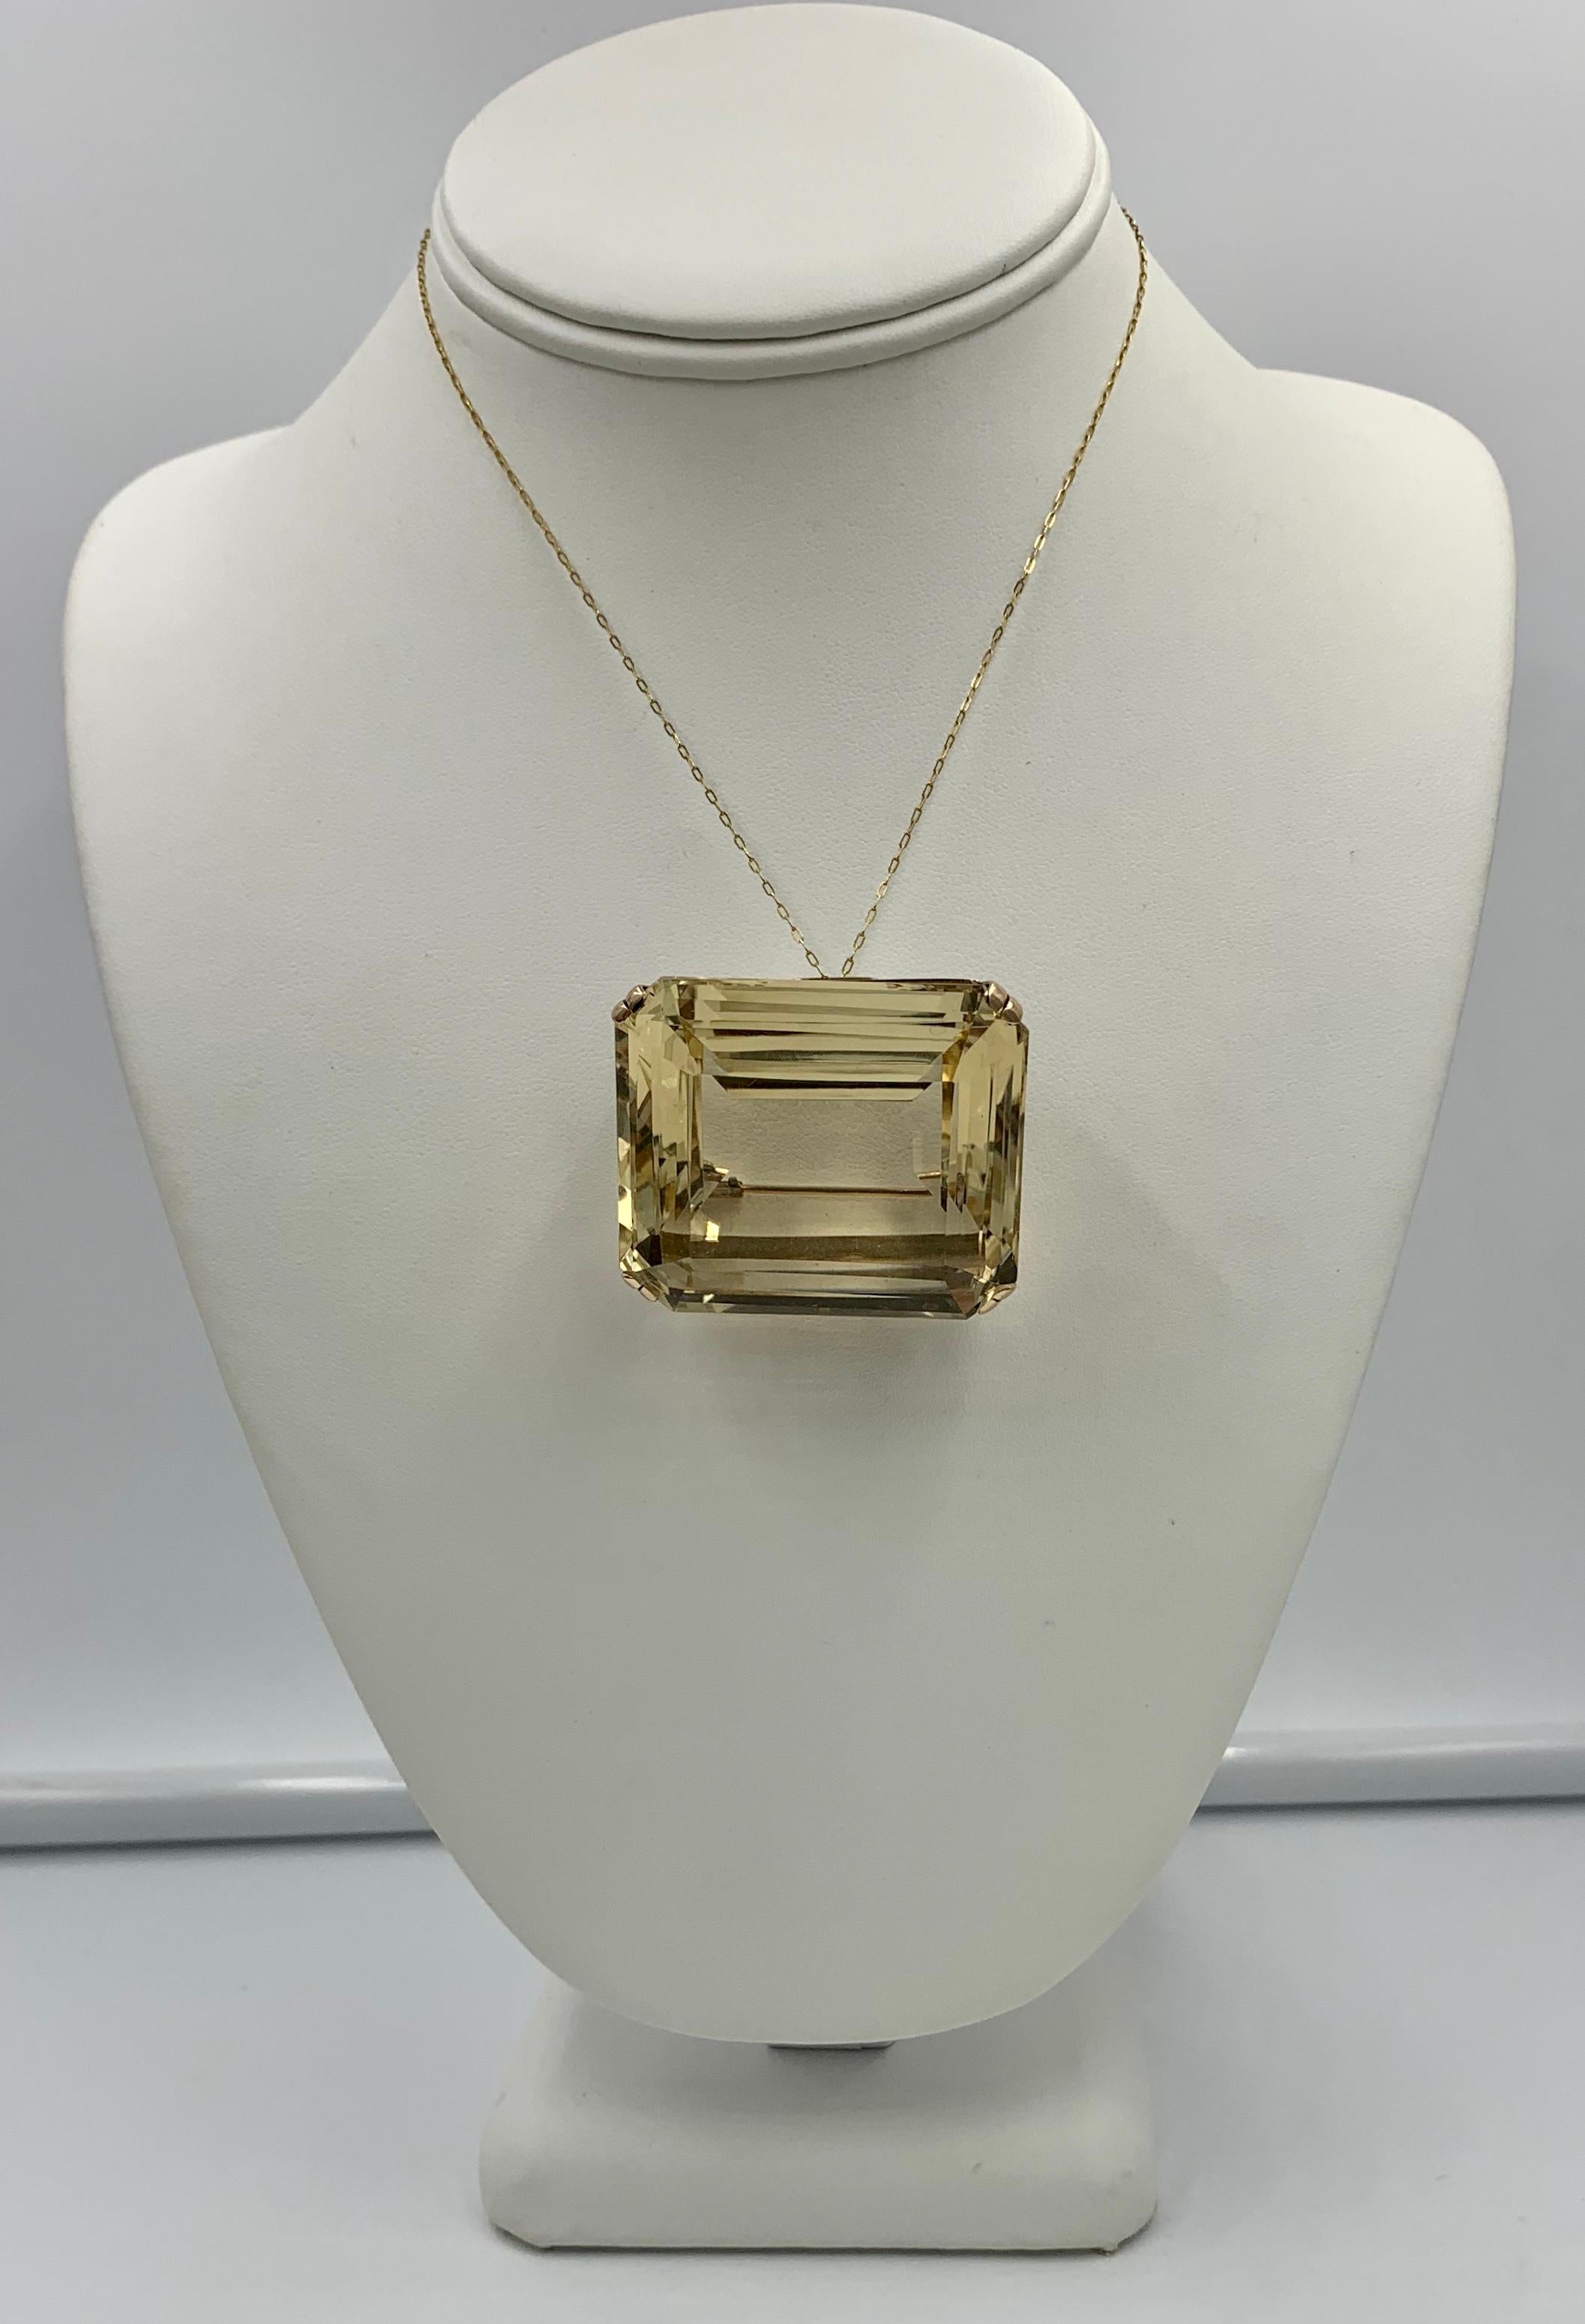 An absolutely magnificent monumental 210 Carat emerald cut Citrine Pendant or Brooch in a classic setting in 14 Karat Gold.  The pendant brooch is a testament to the stunning design of the Retro Mid-Century period.  The monumental 210 Carat Citrine